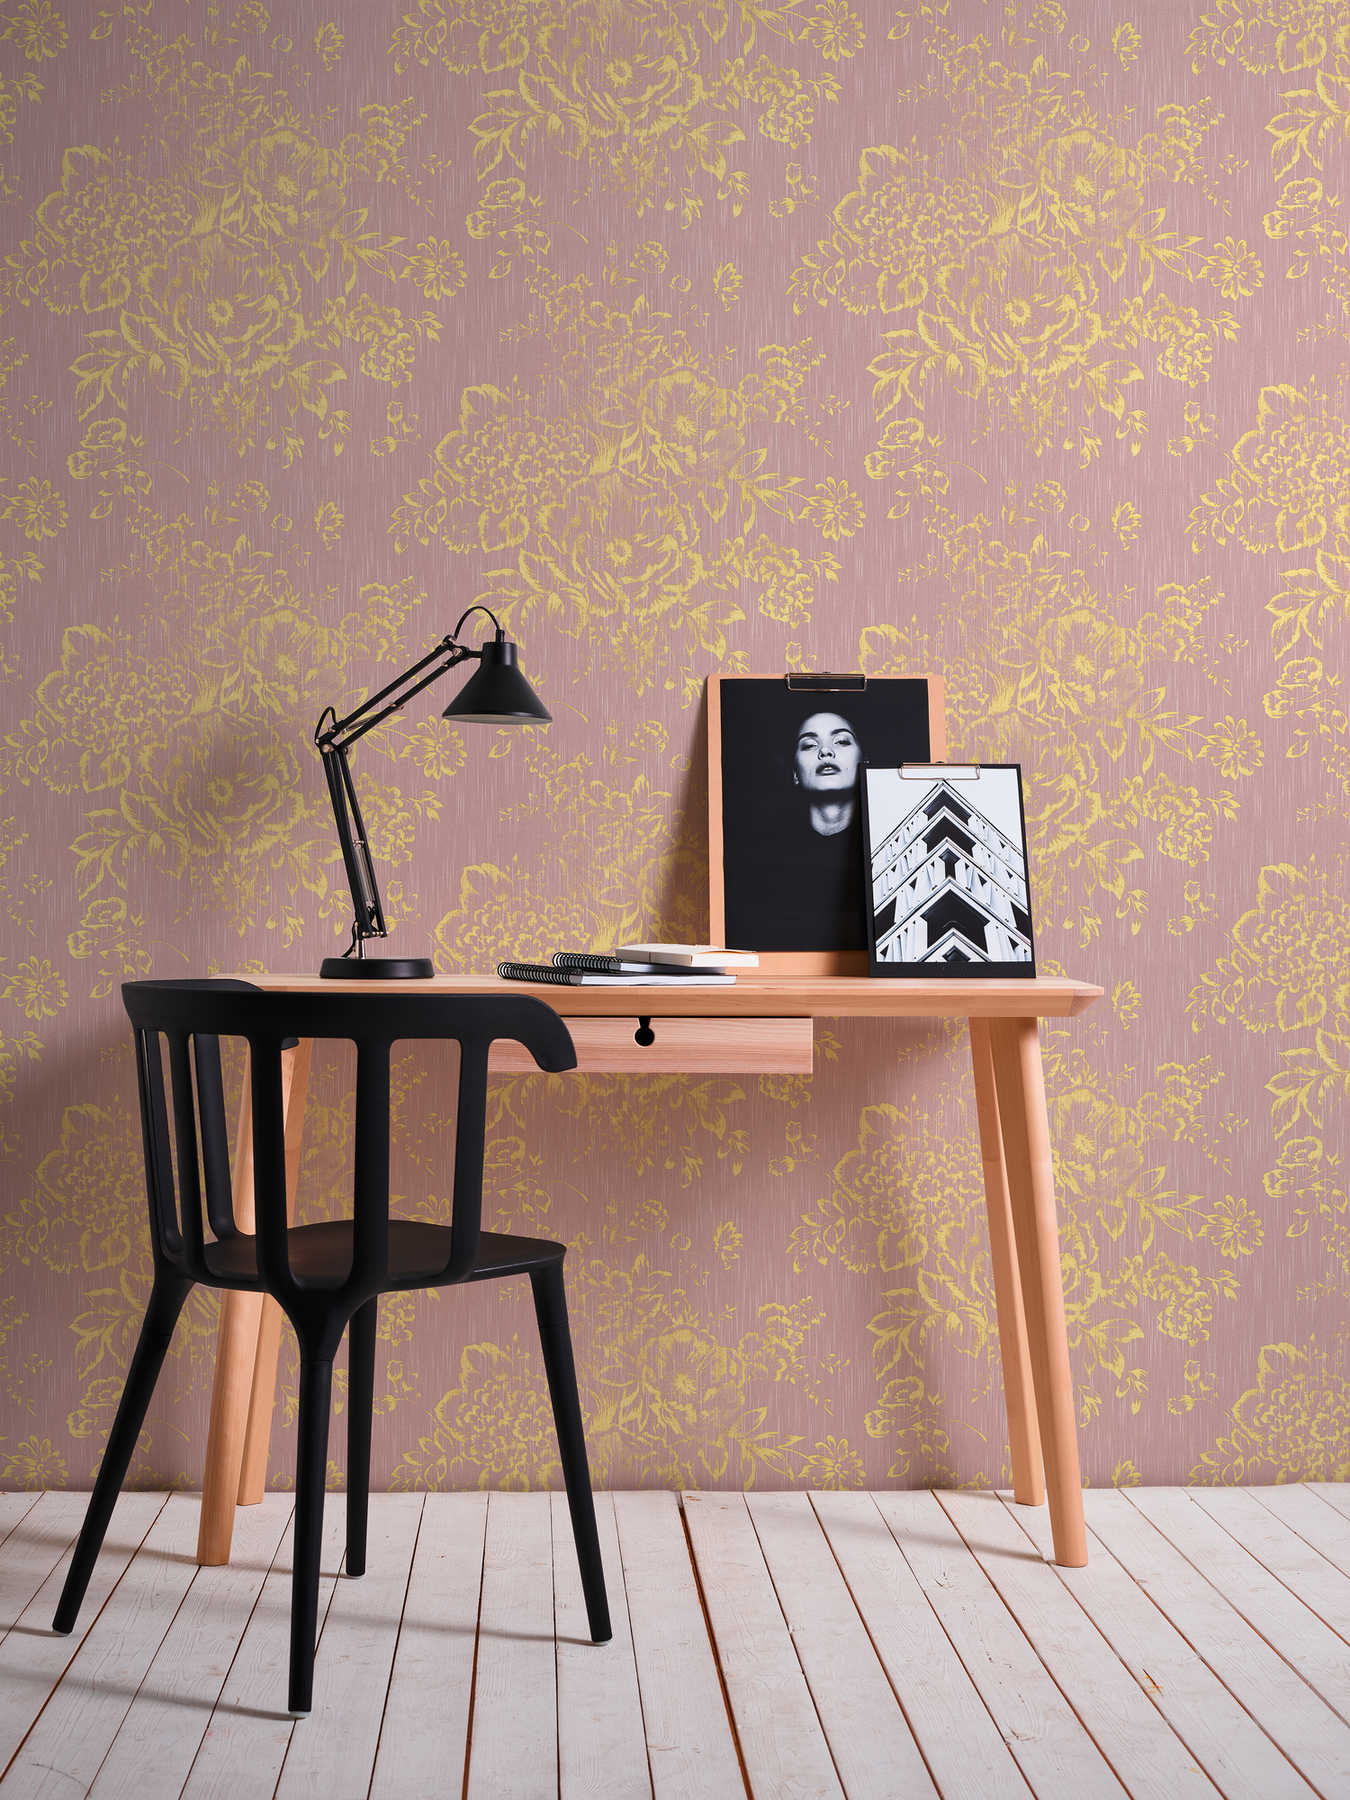             Textured wallpaper with golden floral pattern - gold, pink
        